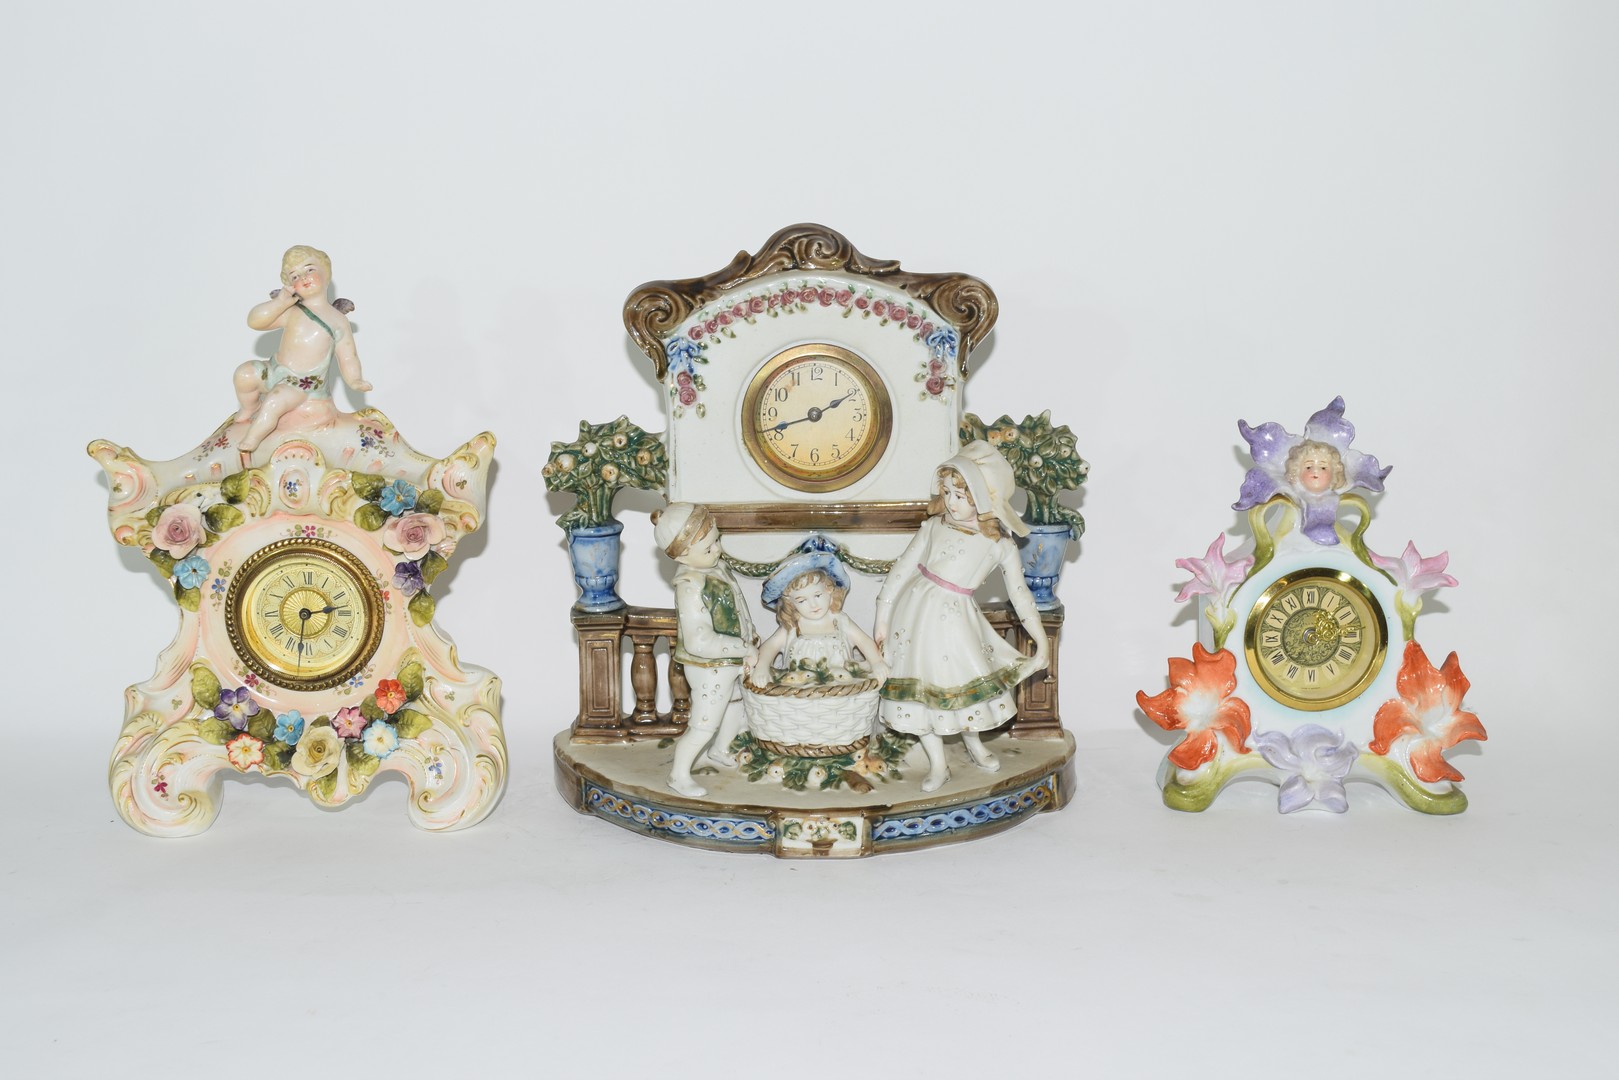 Three examples of Continental porcelain clock mantel cases